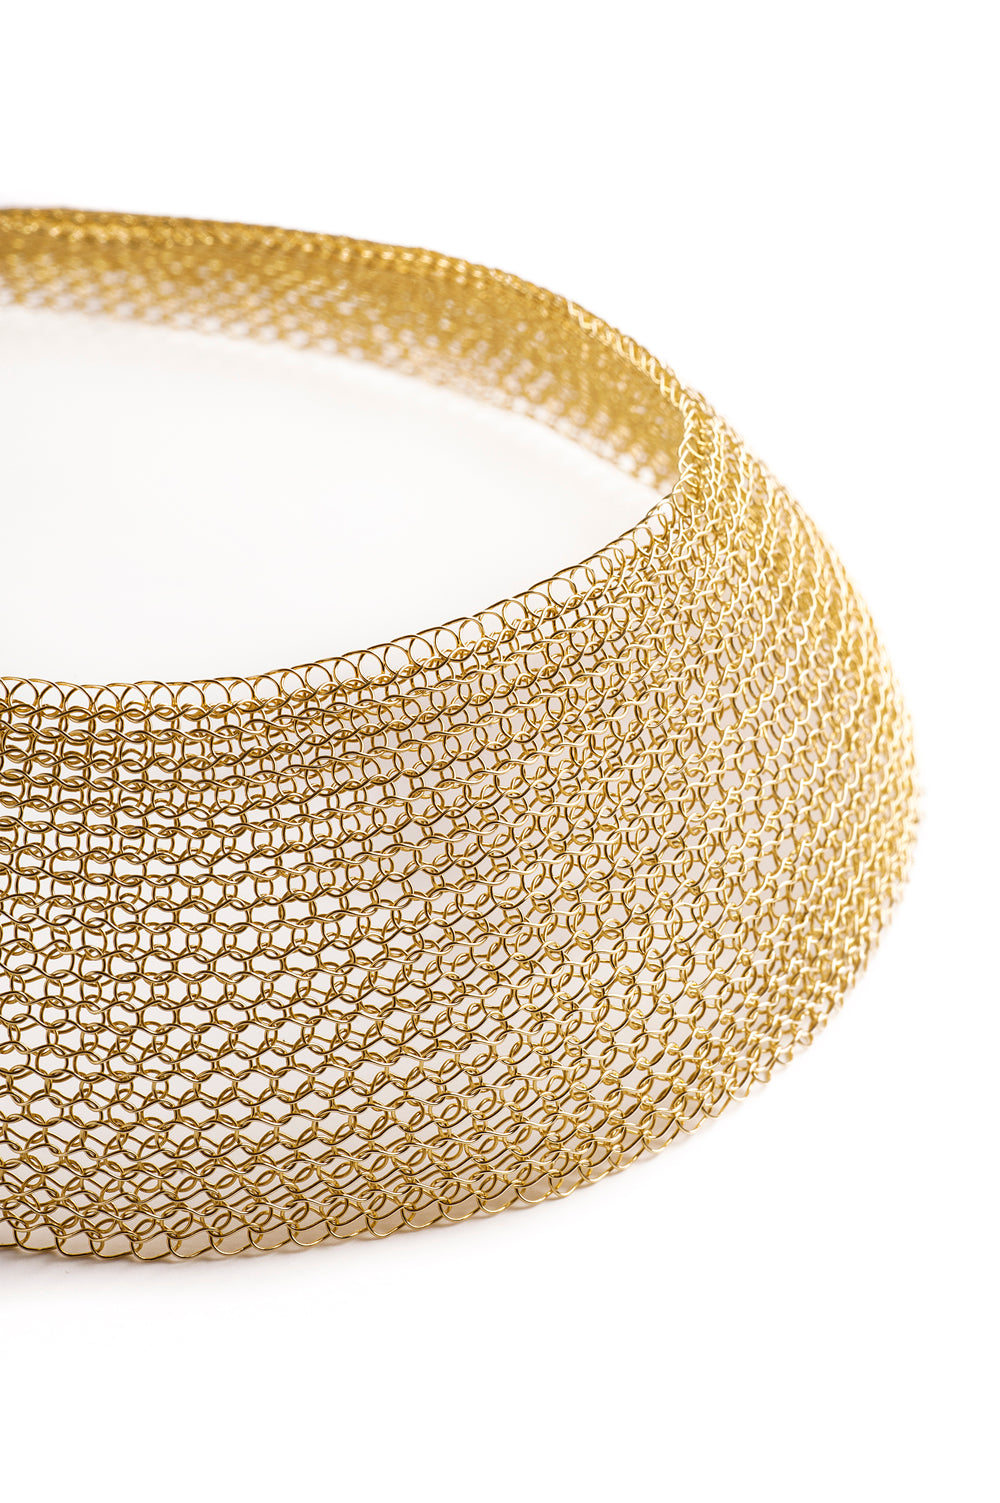 Rolled Gold Cleopatra Necklet - 18.5in - EXCLUSIVE - R9950 | F.Hinds  Jewellers